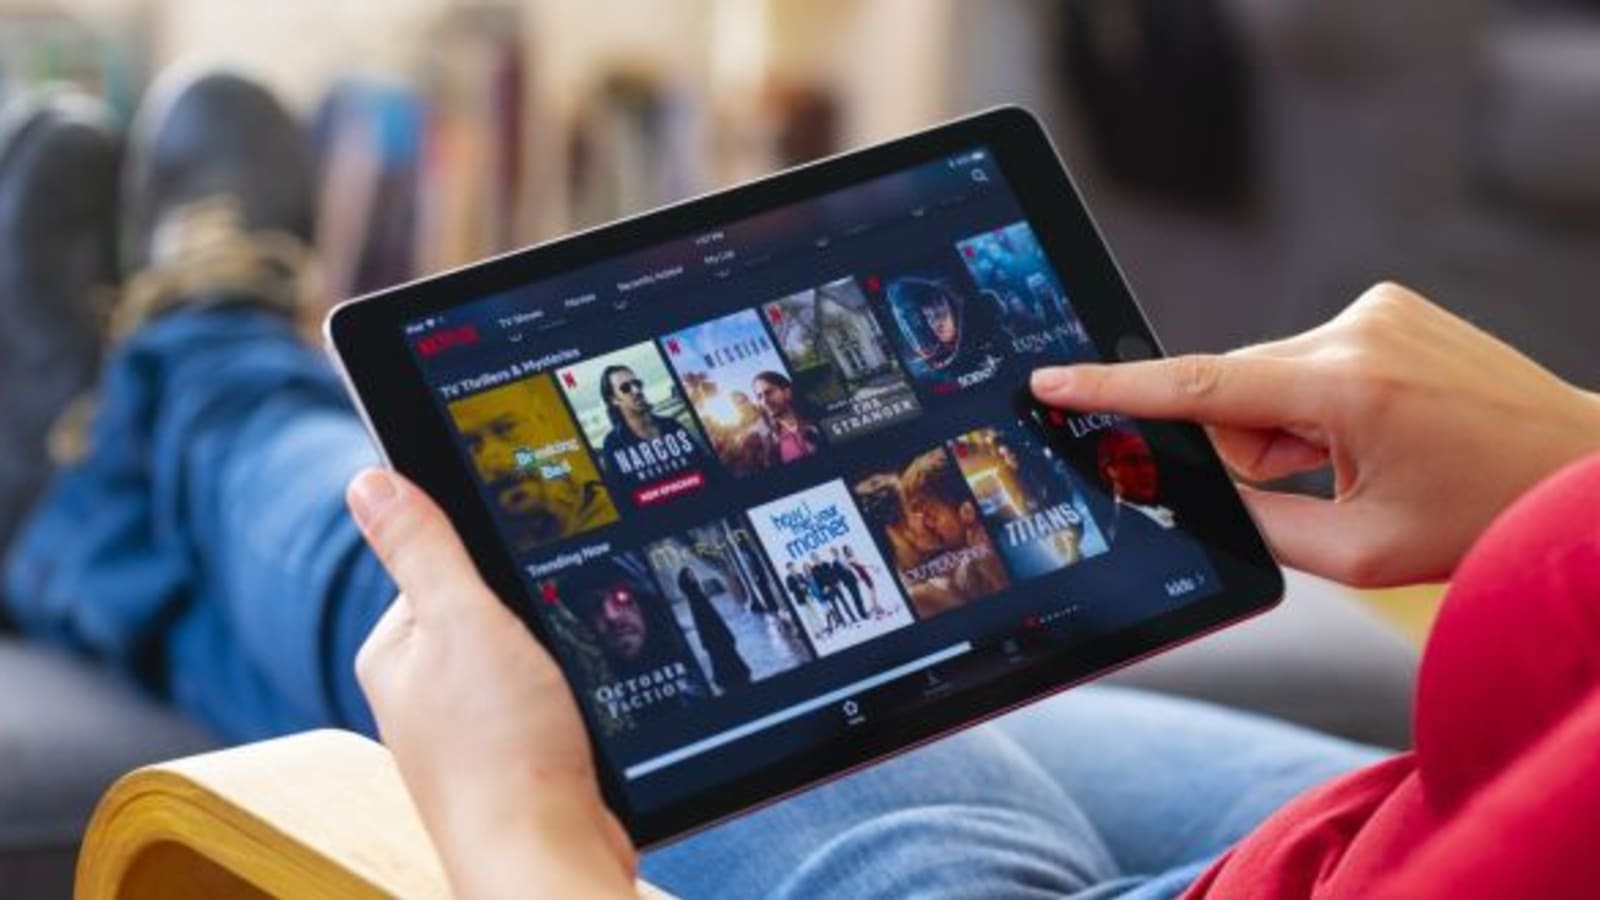 Top 12 Video On Demand Companies To Build a VOD Platform in 2022